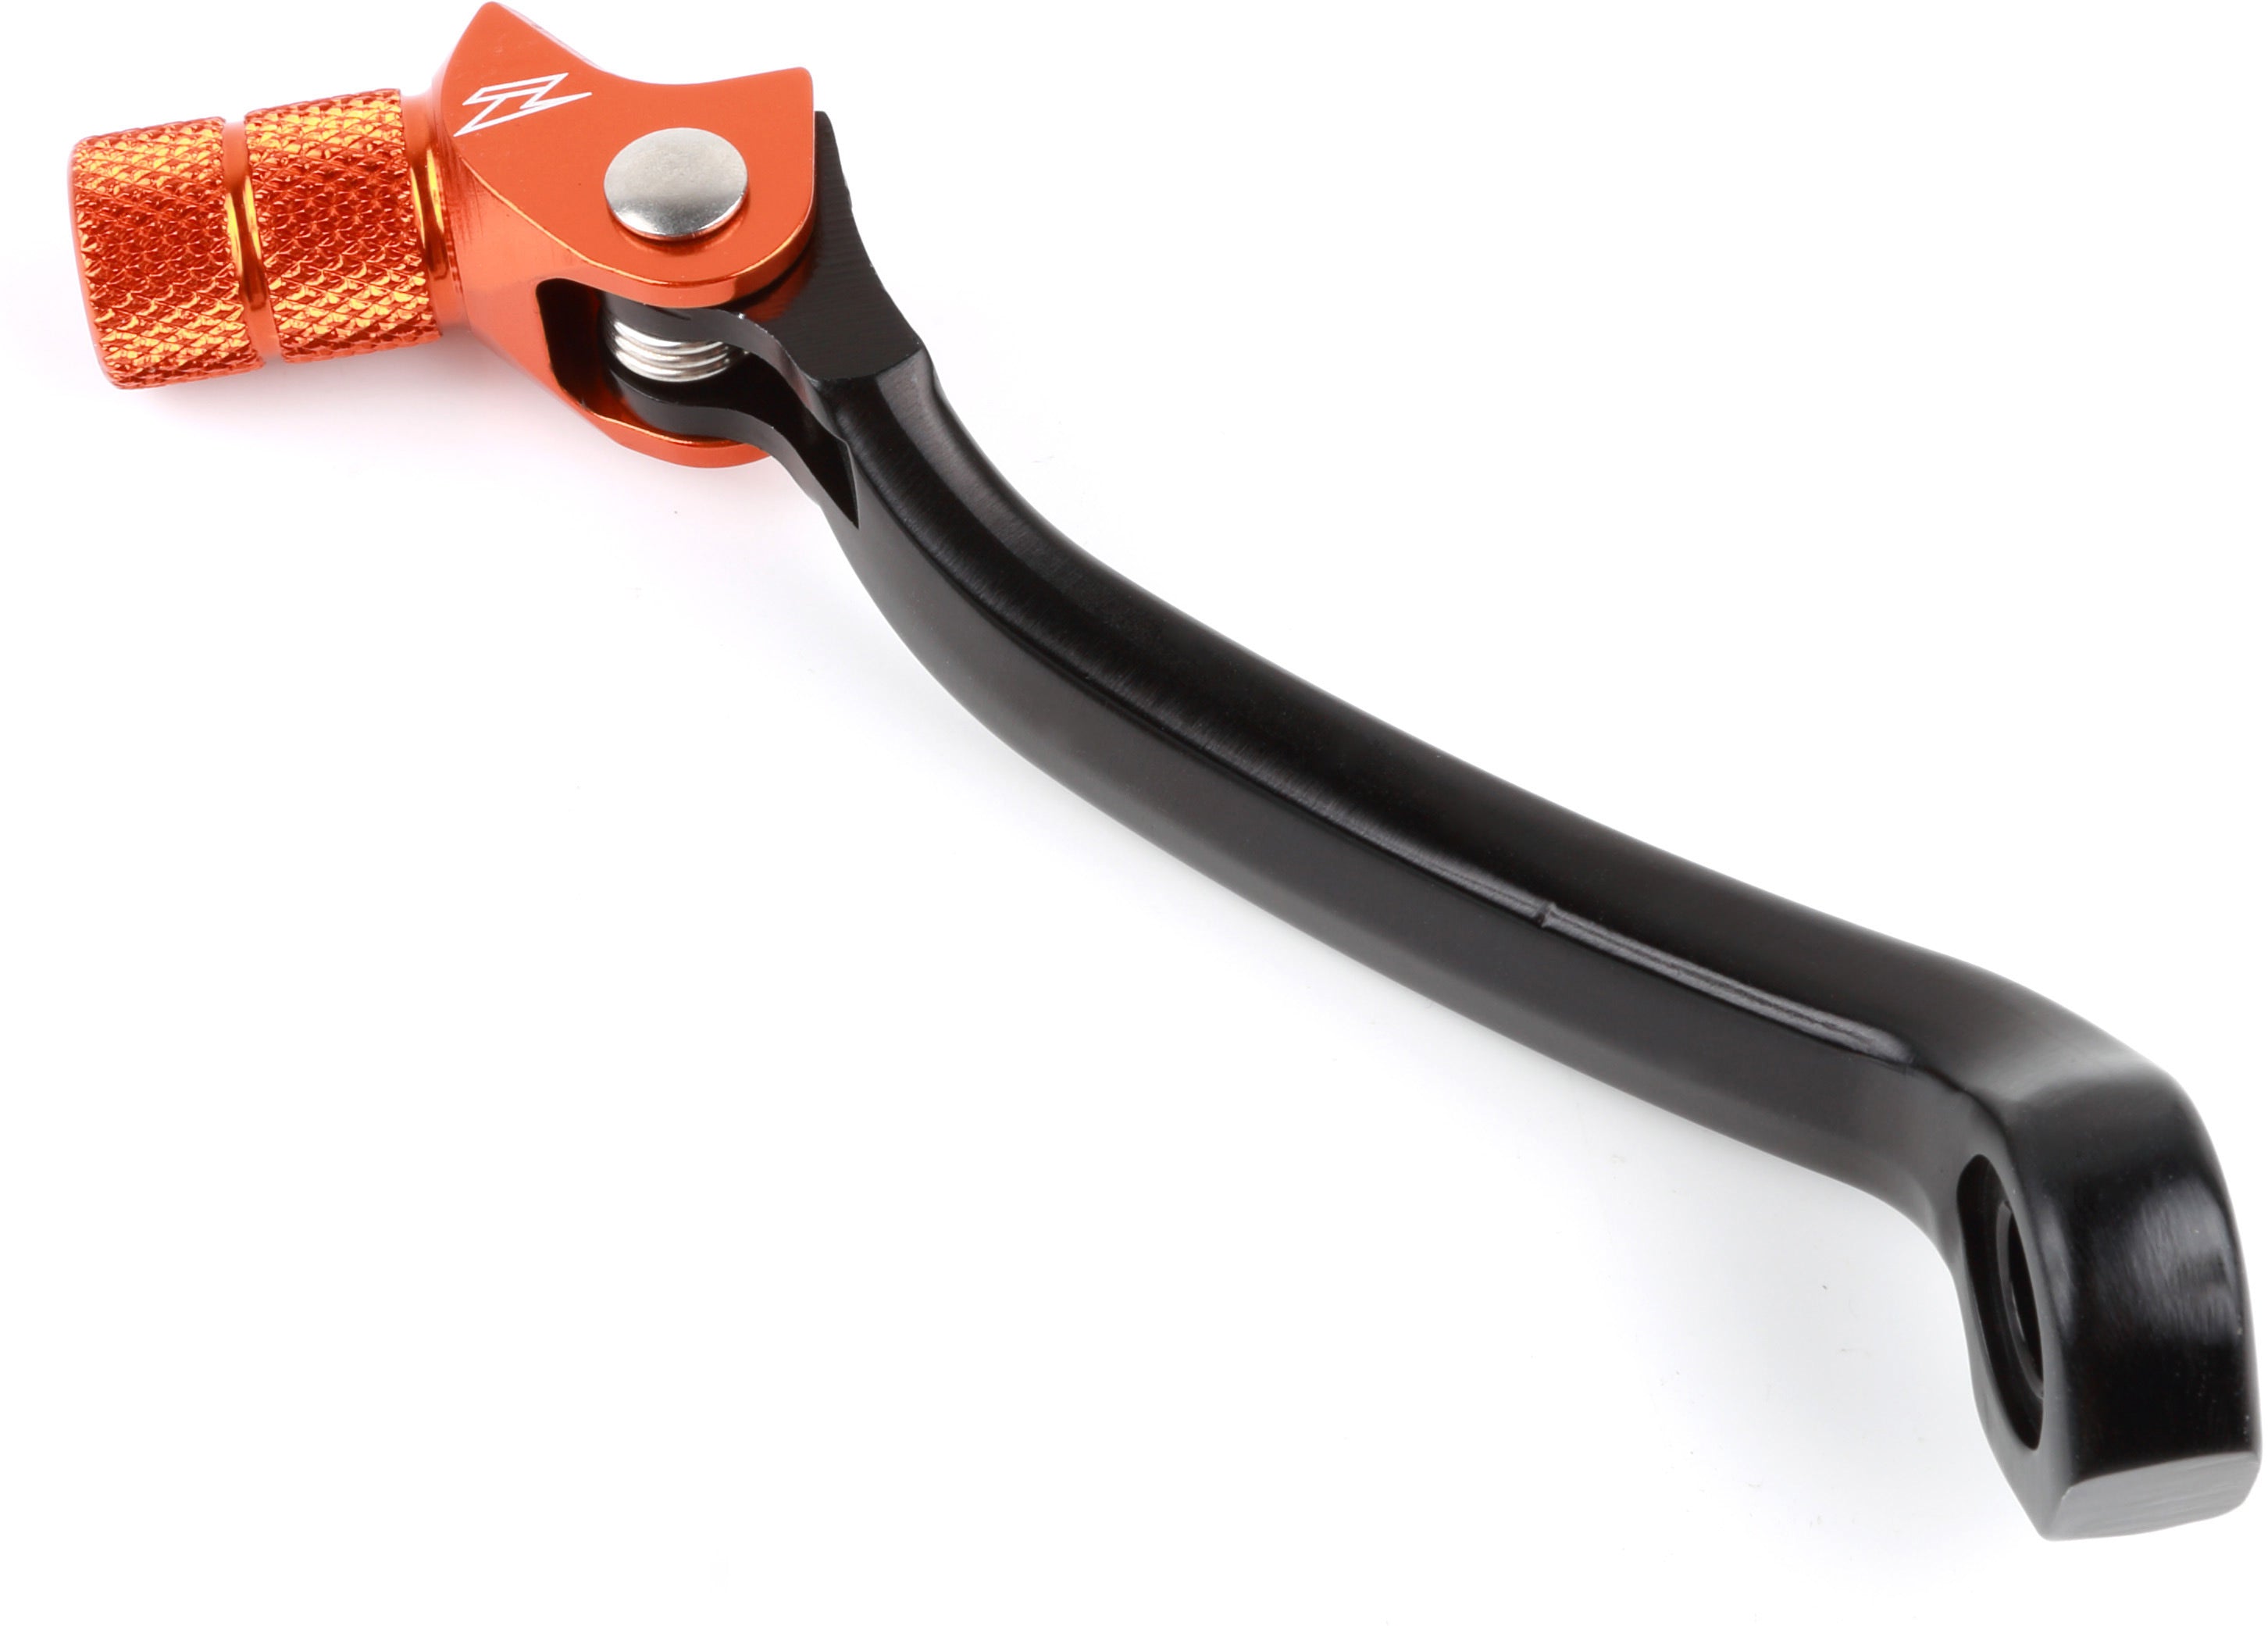 Forged Shift Lever for KTM SX/EXC 250/300 17-22 and SXF/EXCF 250/350 17-22 in Orange